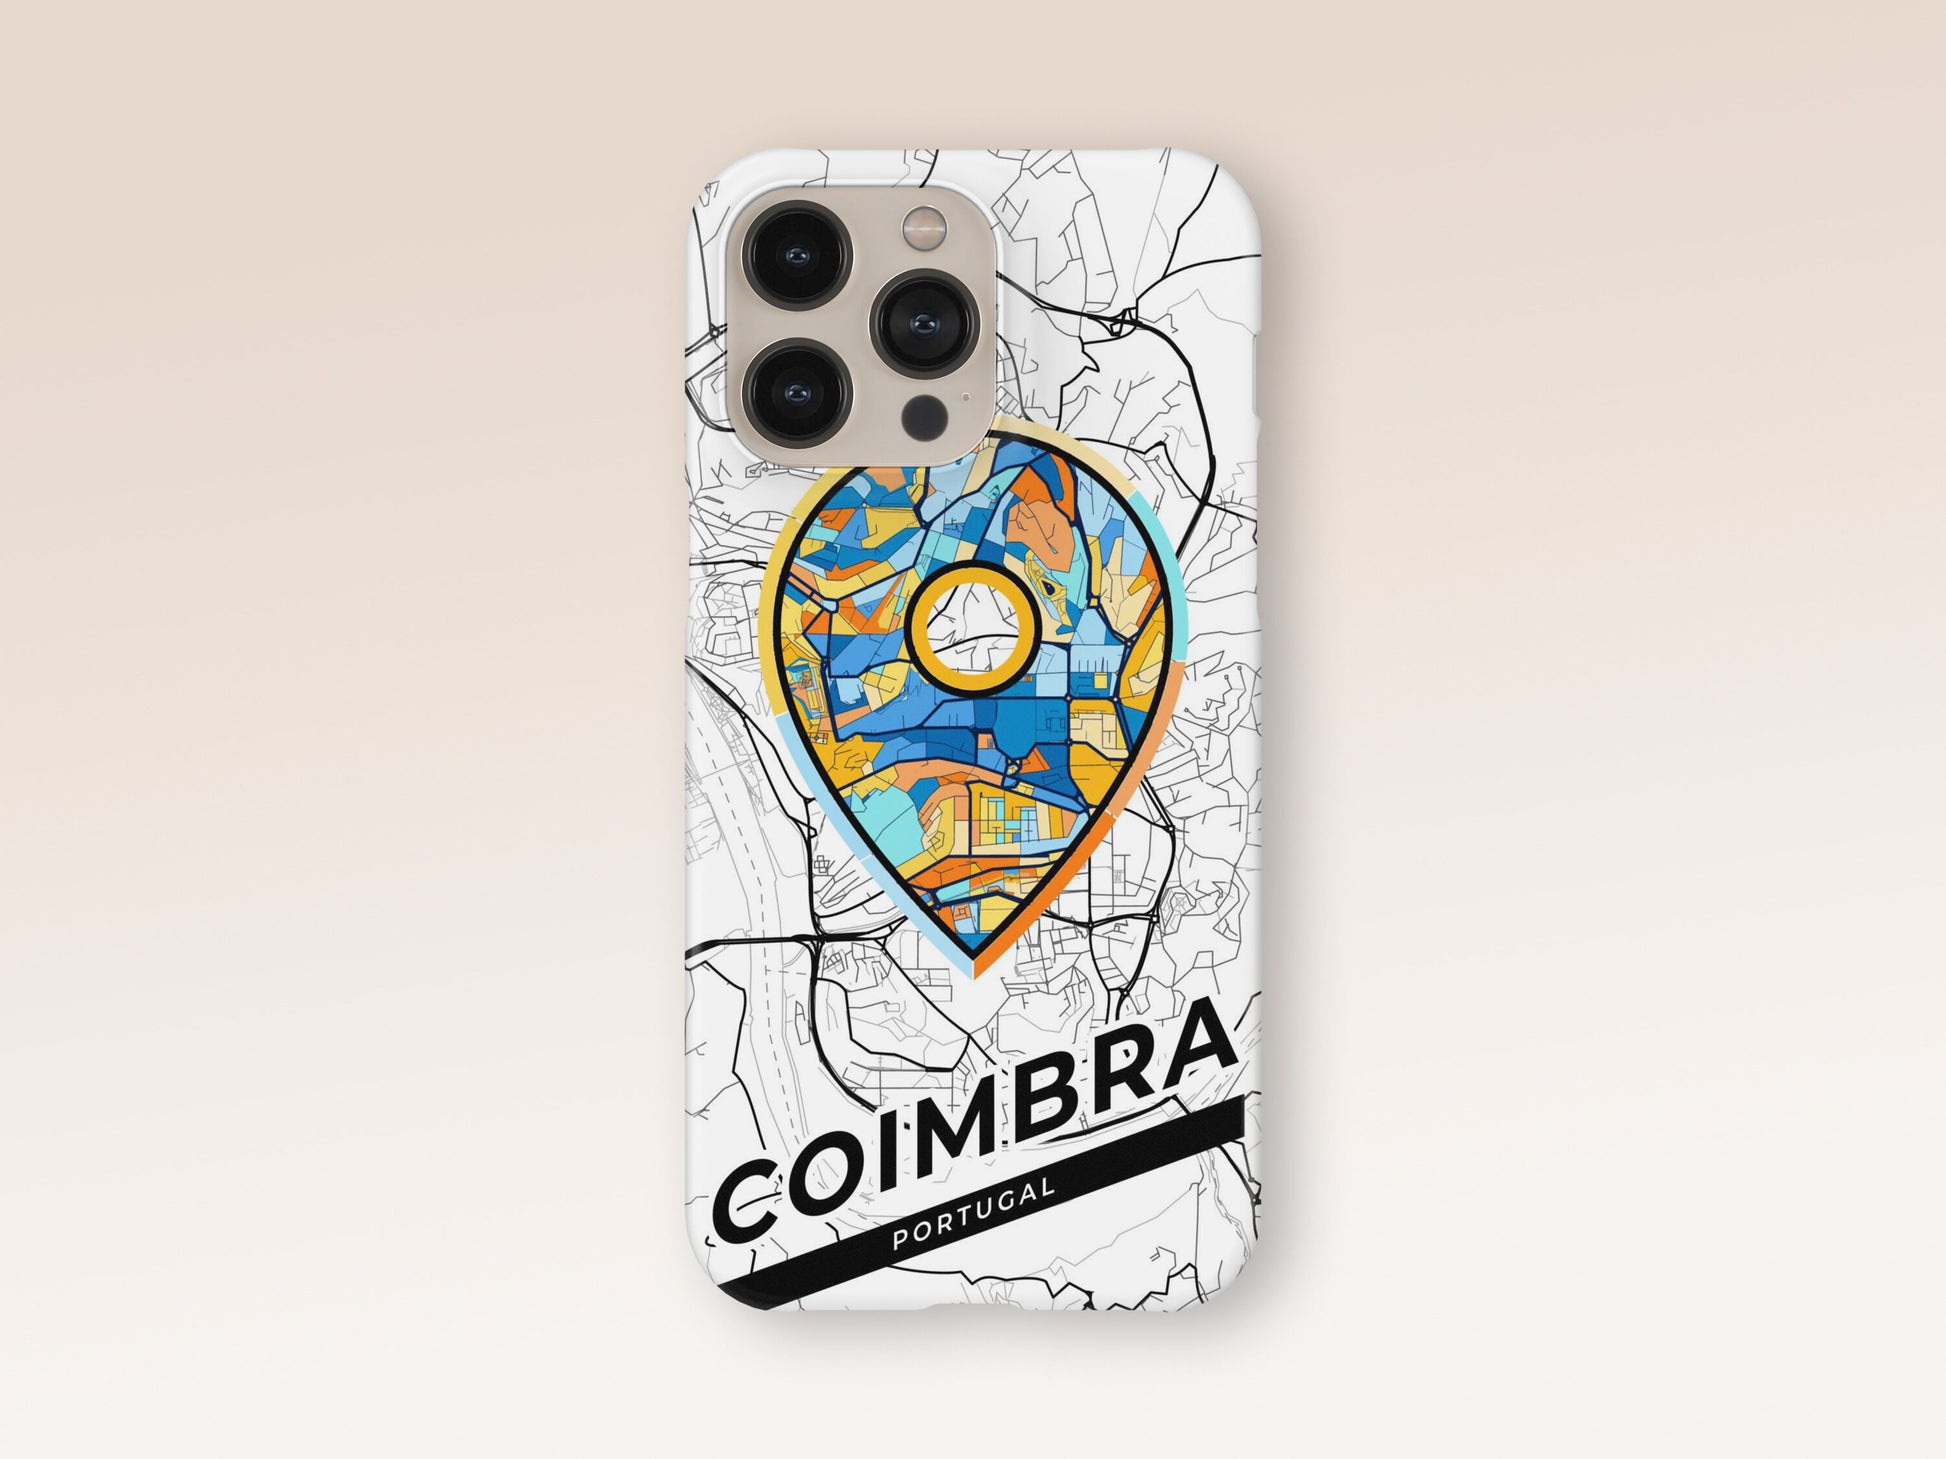 Coimbra Portugal slim phone case with colorful icon. Birthday, wedding or housewarming gift. Couple match cases. 1